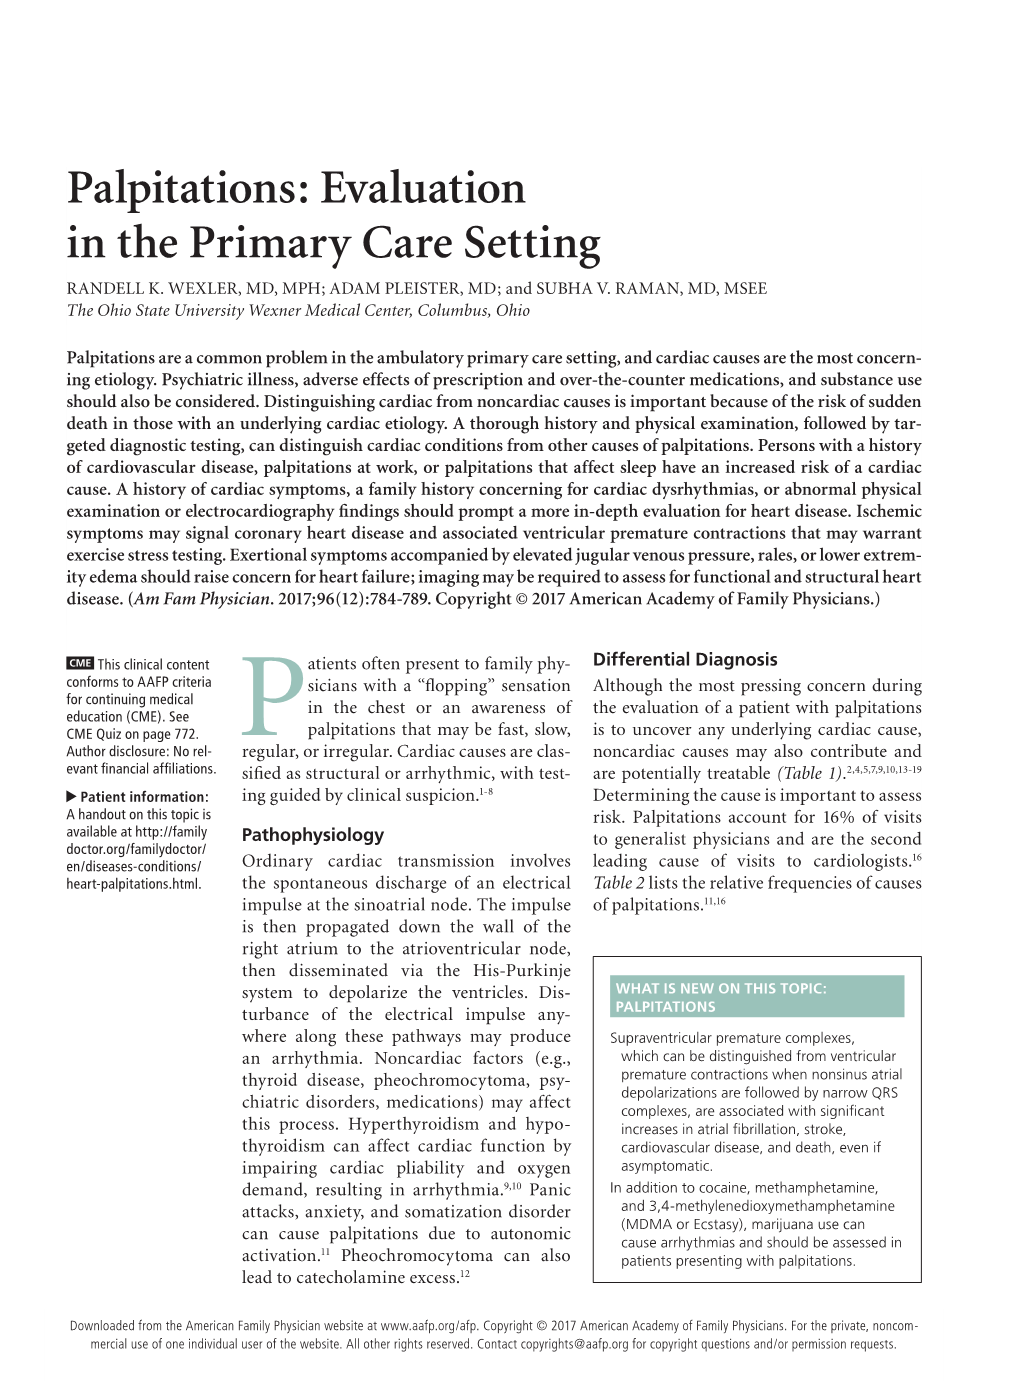 Palpitations: Evaluation in the Primary Care Setting RANDELL K